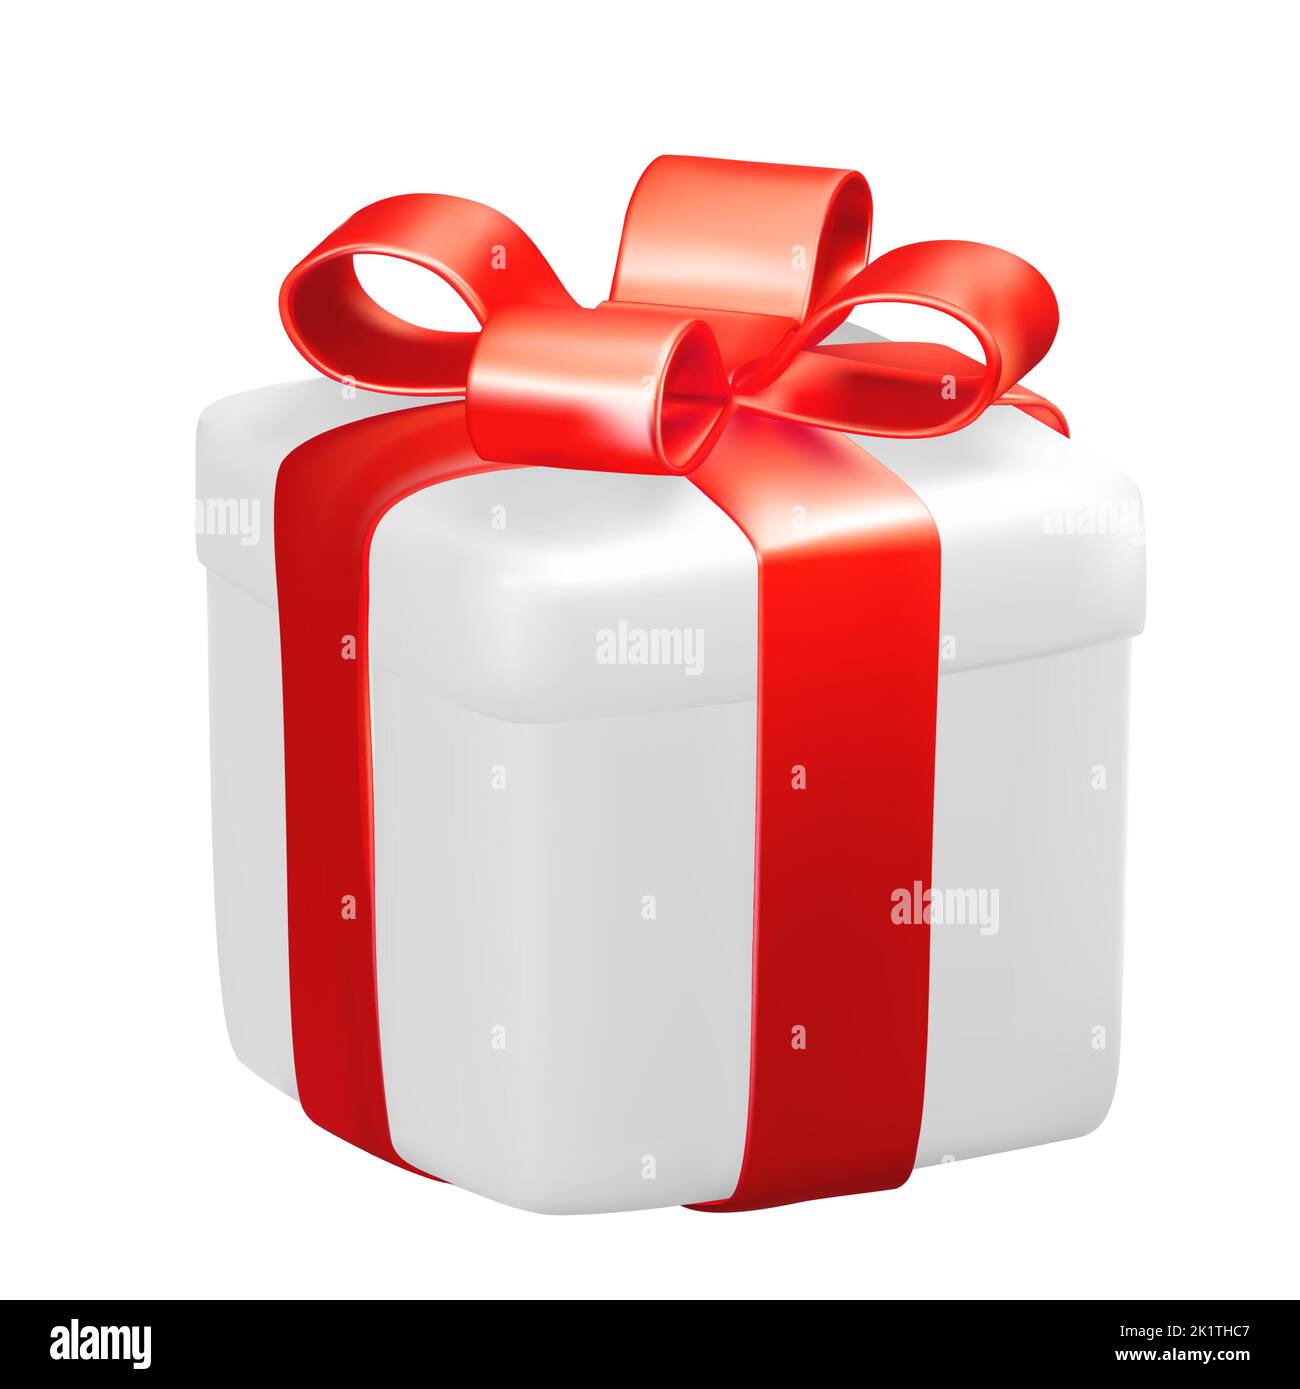 Realistic 3D White Gift Box with Red Ribbon. Vector Illustration EPS10 Stock Vector